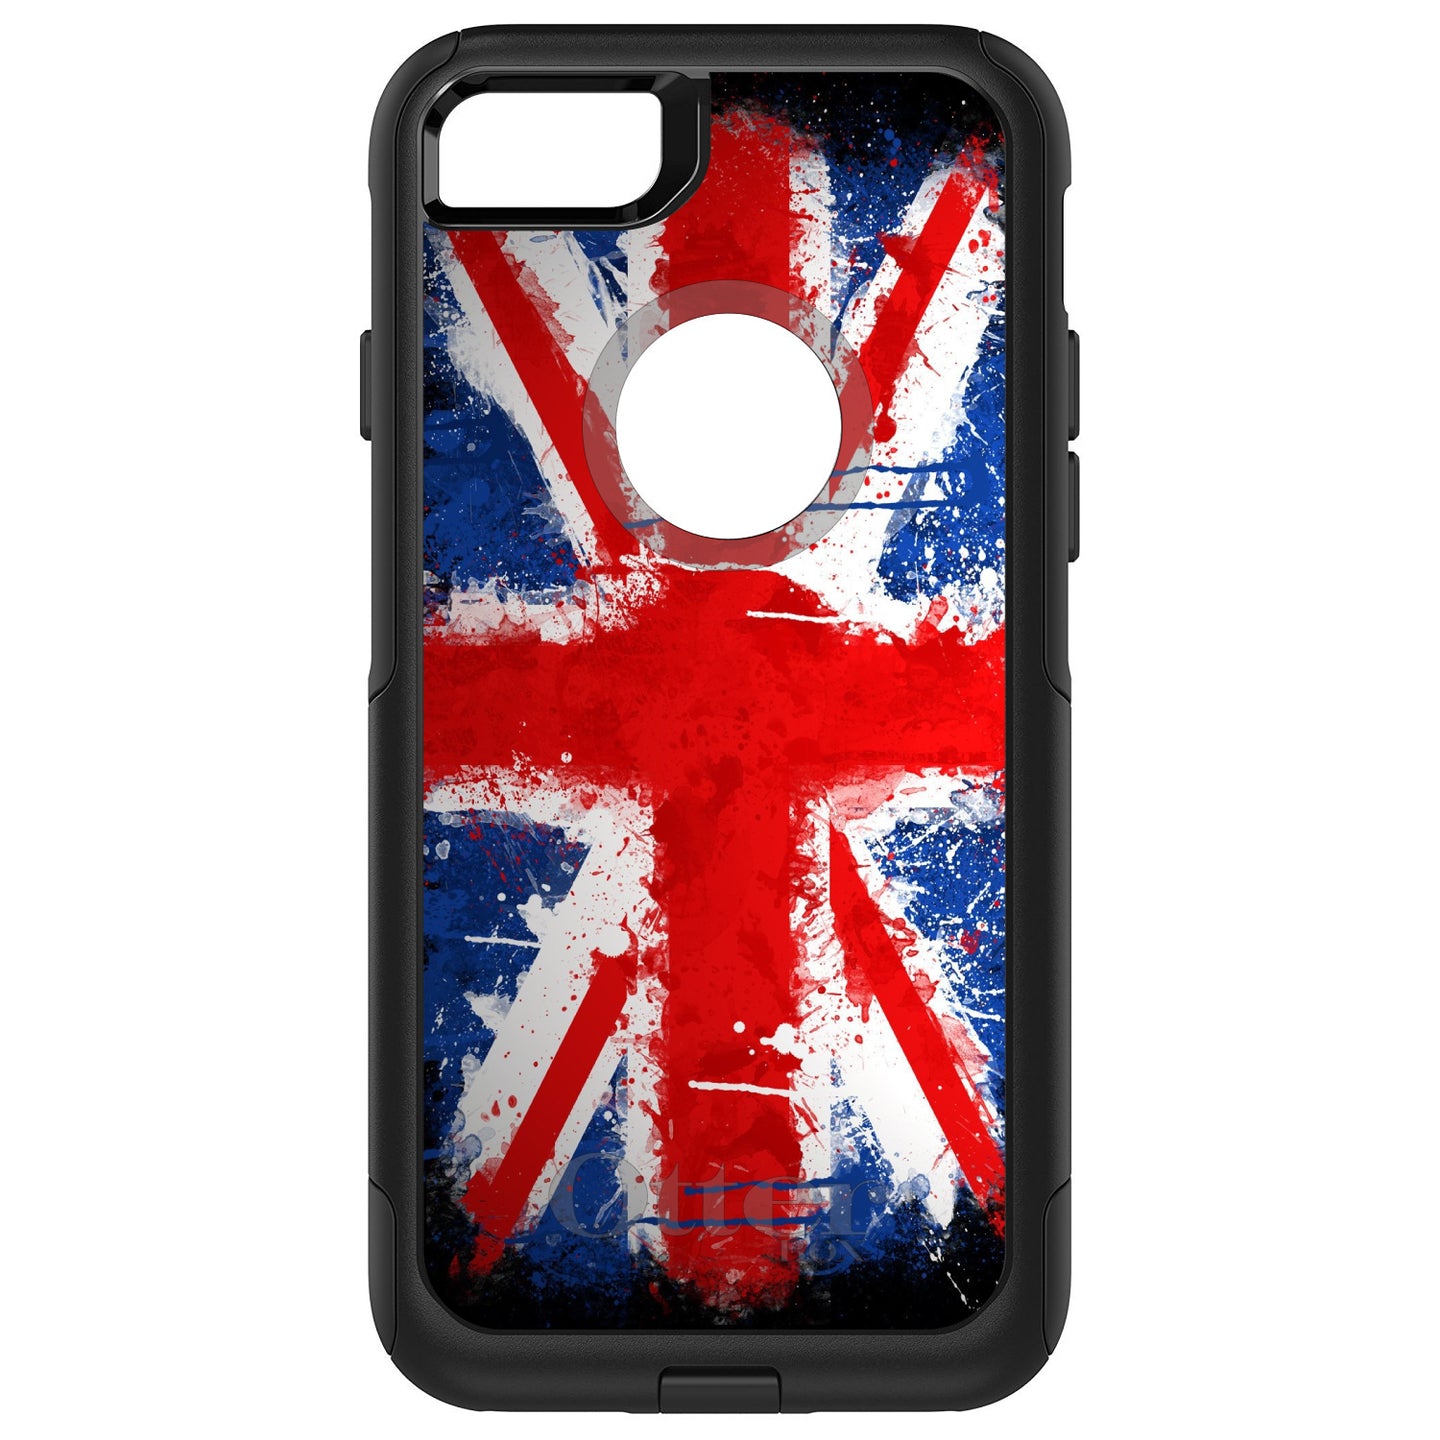 DistinctInk™ OtterBox Commuter Series Case for Apple iPhone or Samsung Galaxy - Red White Blue British Flag Graffiti